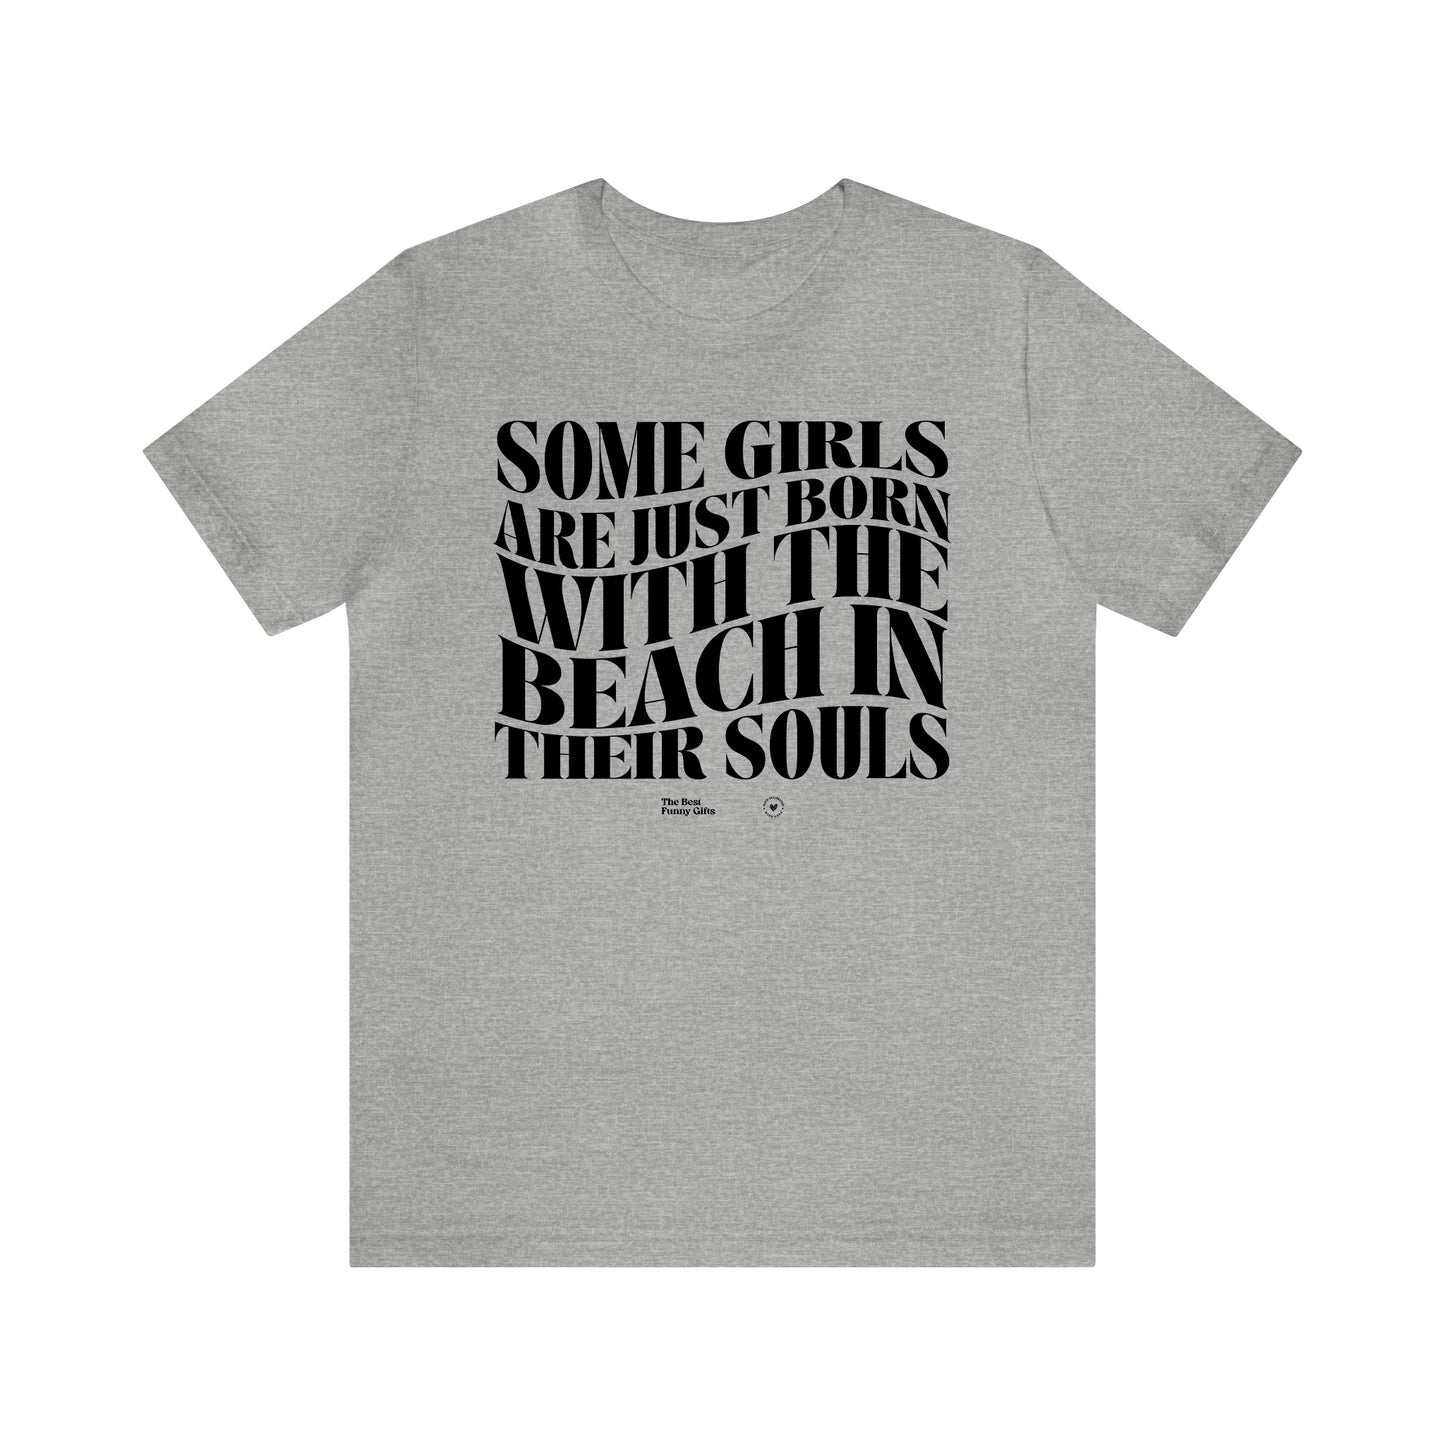 Funny Shirts for Women - Some Girls Are Just Born With the Beach in Their Souls - Women’s T Shirts